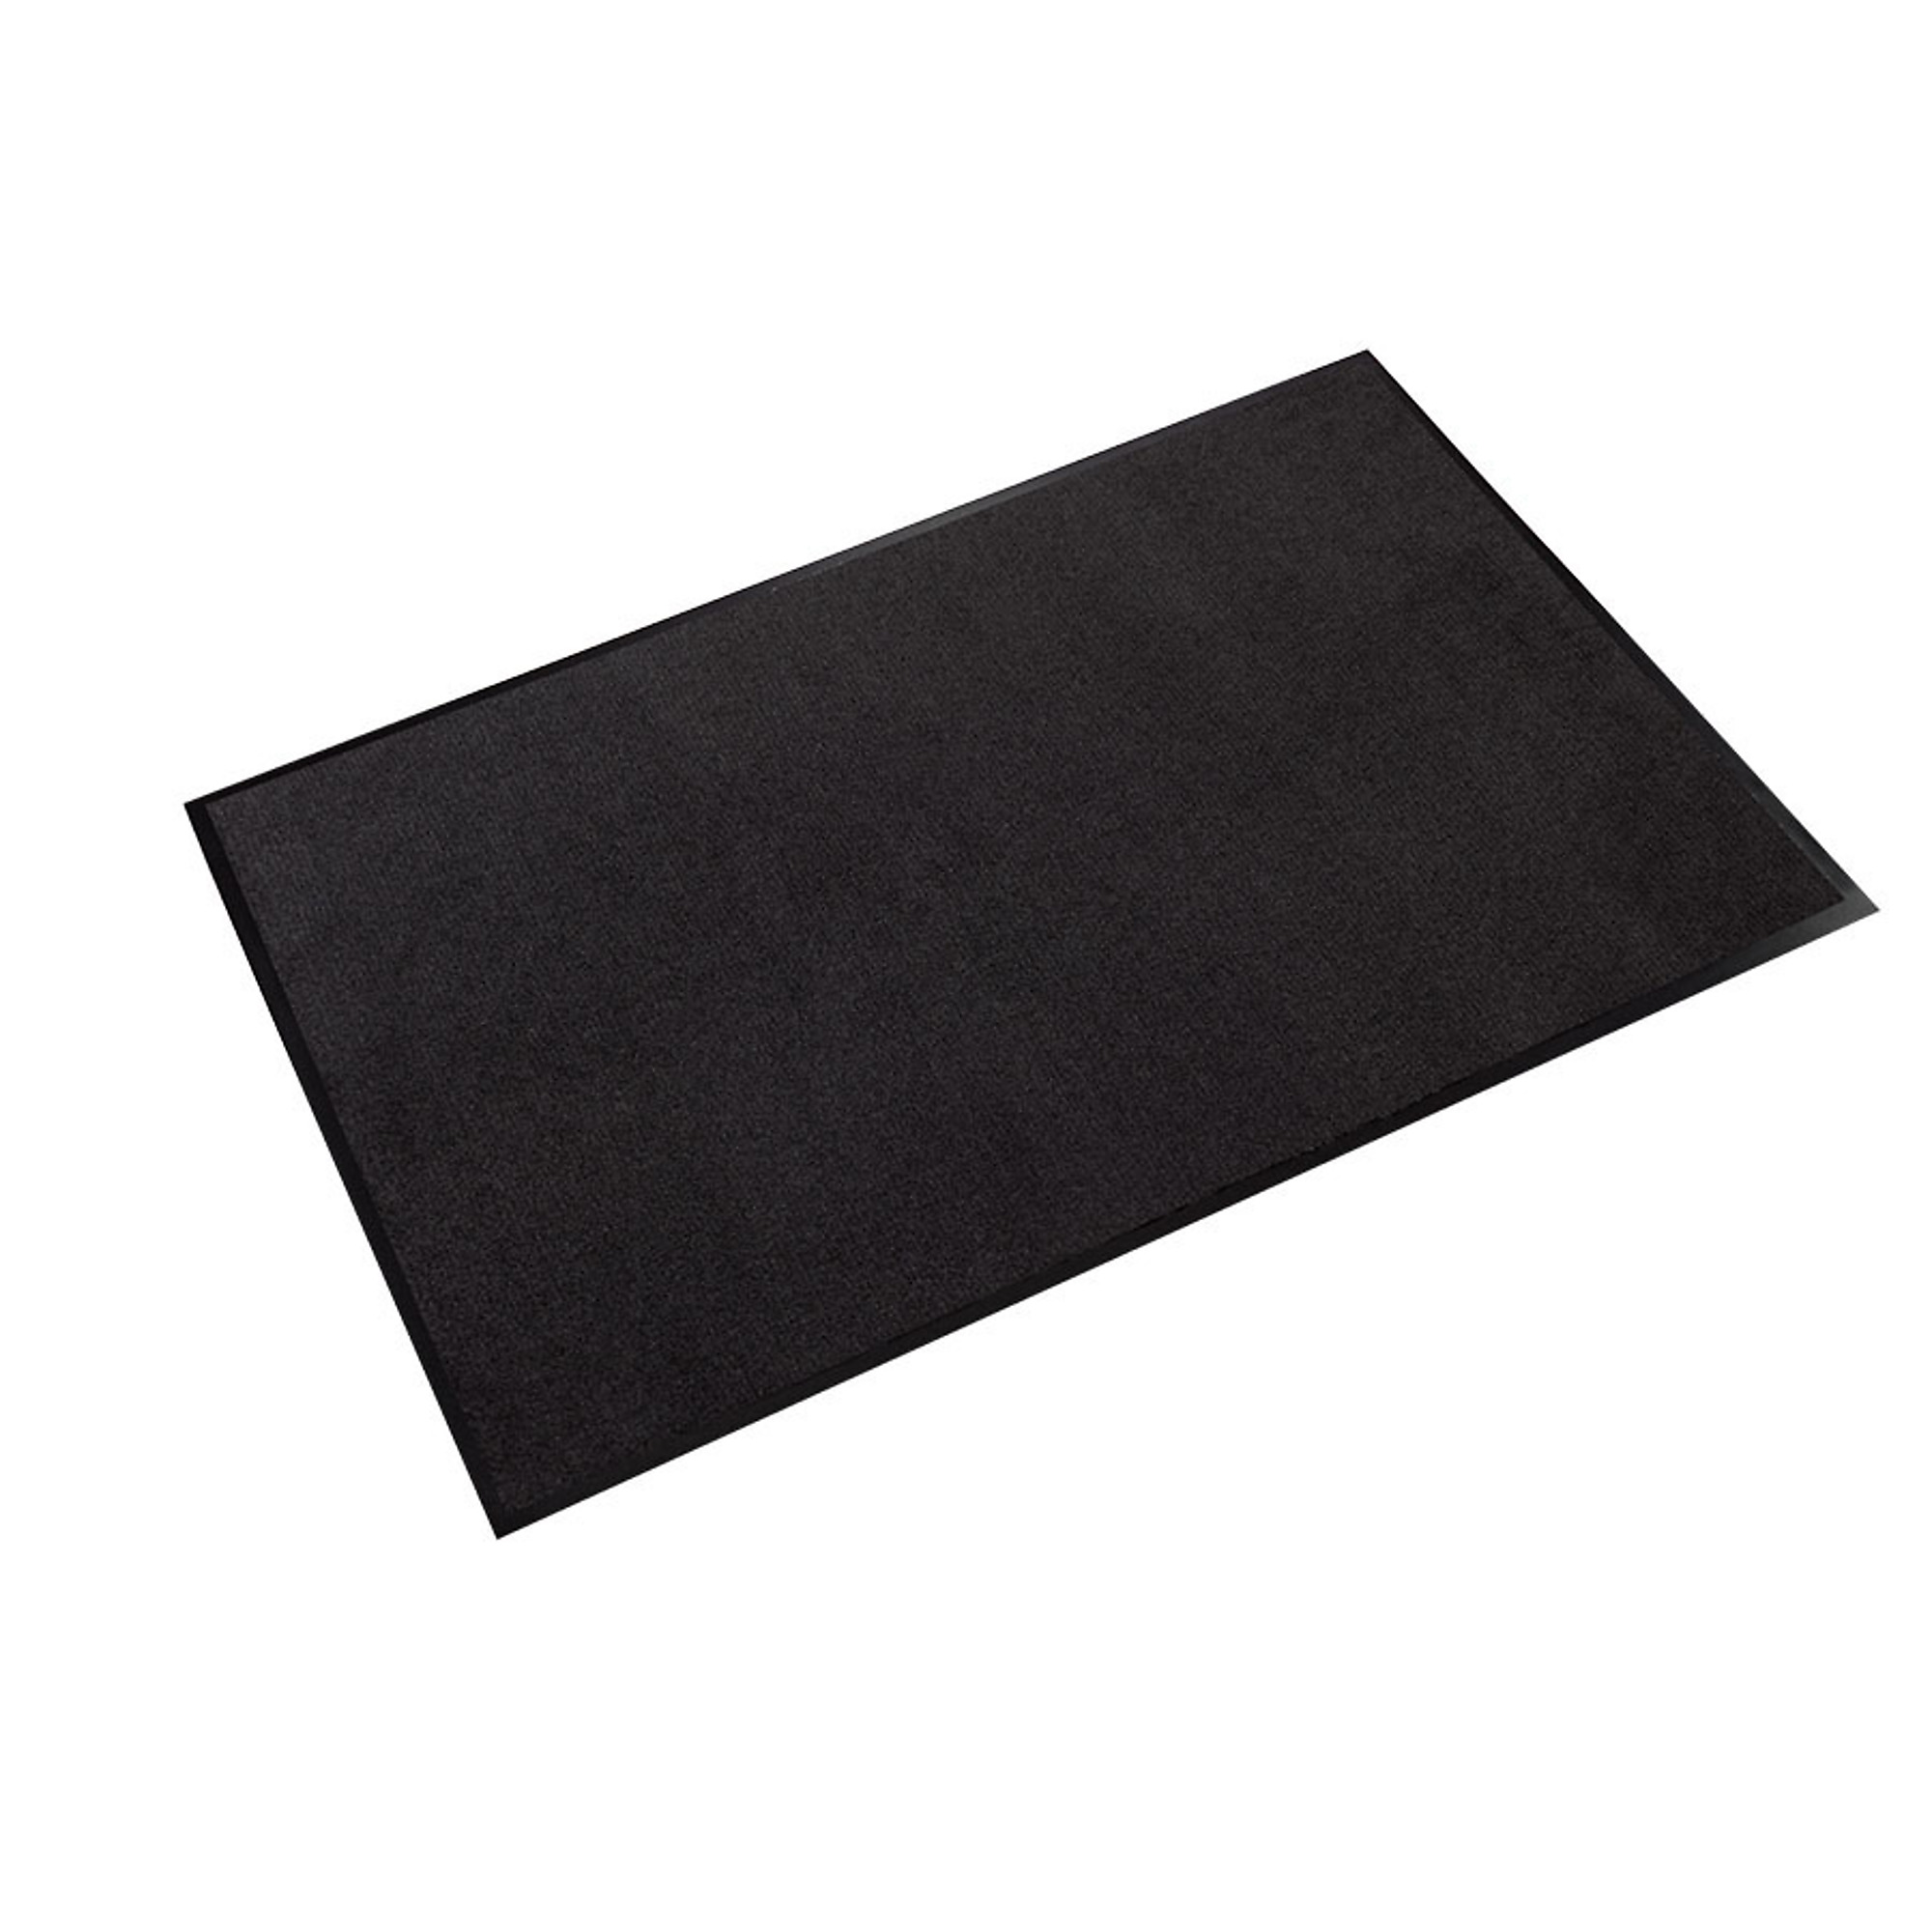 Crown Matting Technologies, Rely-On Olefin 4ft.x60ft. Black, Width 48 in, Length 720 in, Thickness 3/8 in, Model GSR0048BK